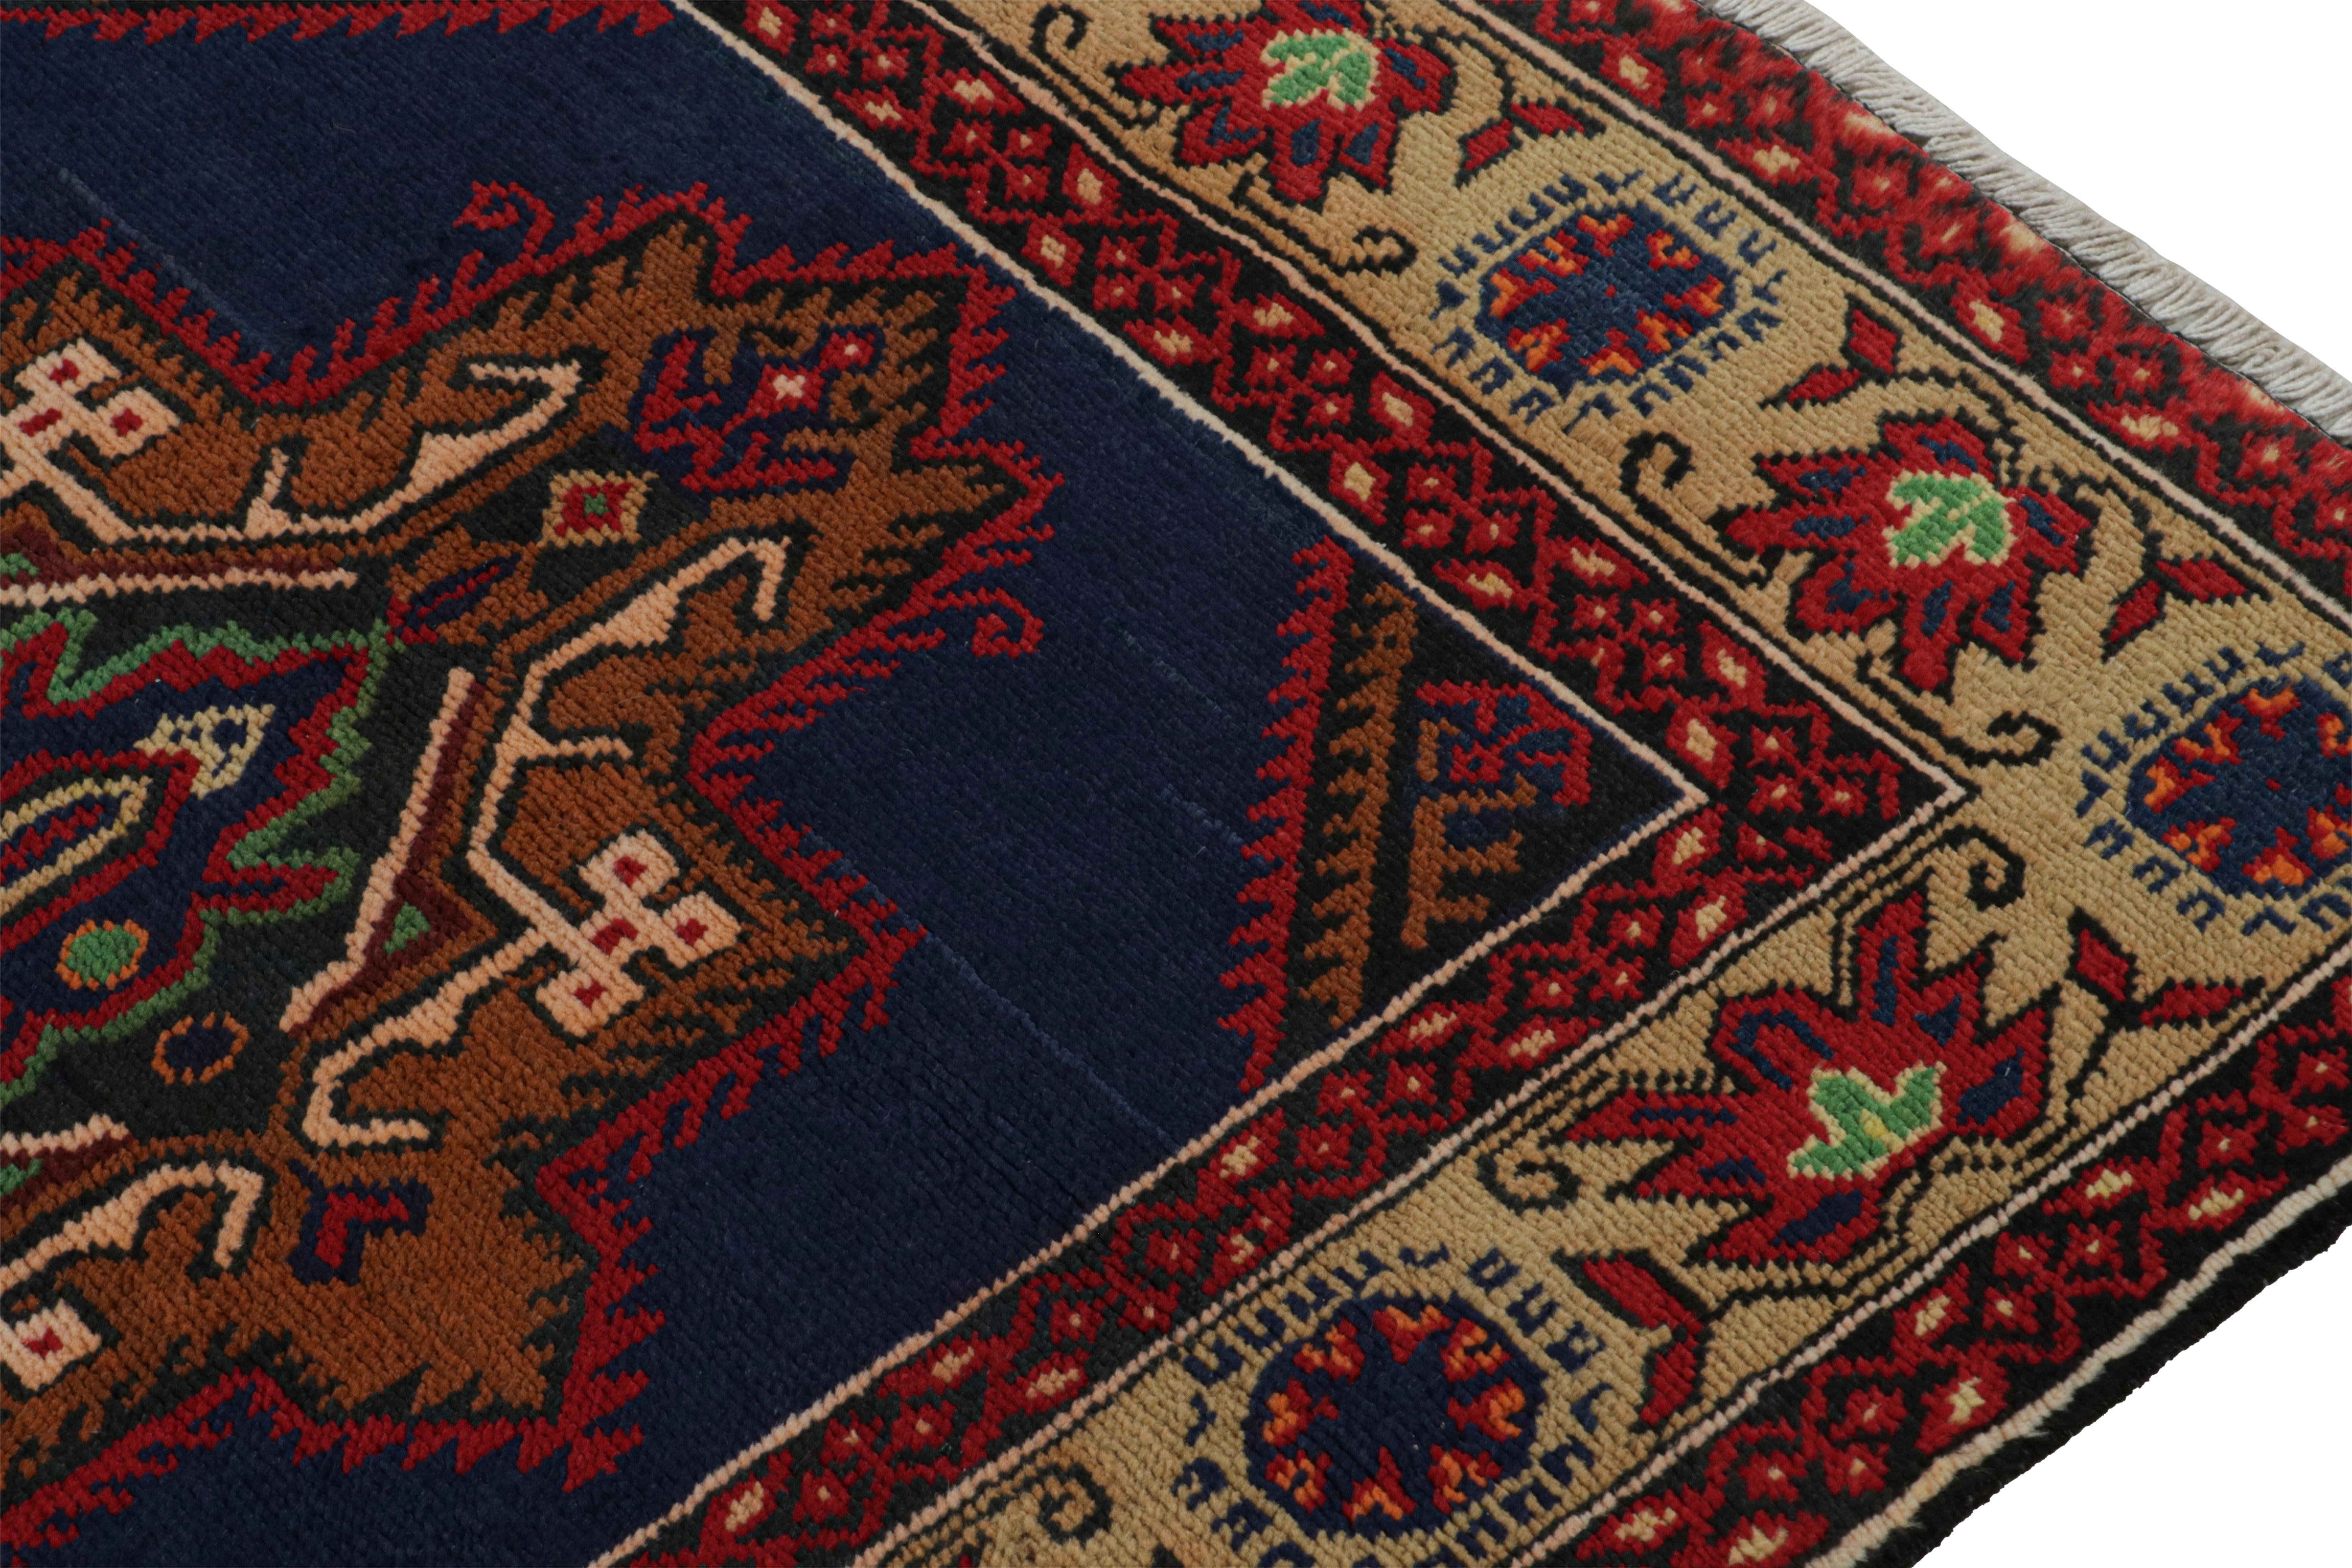 Vintage Baluch Tribal Runner in Red, Blue & Brown Patterns by Rug & Kilim In Good Condition For Sale In Long Island City, NY